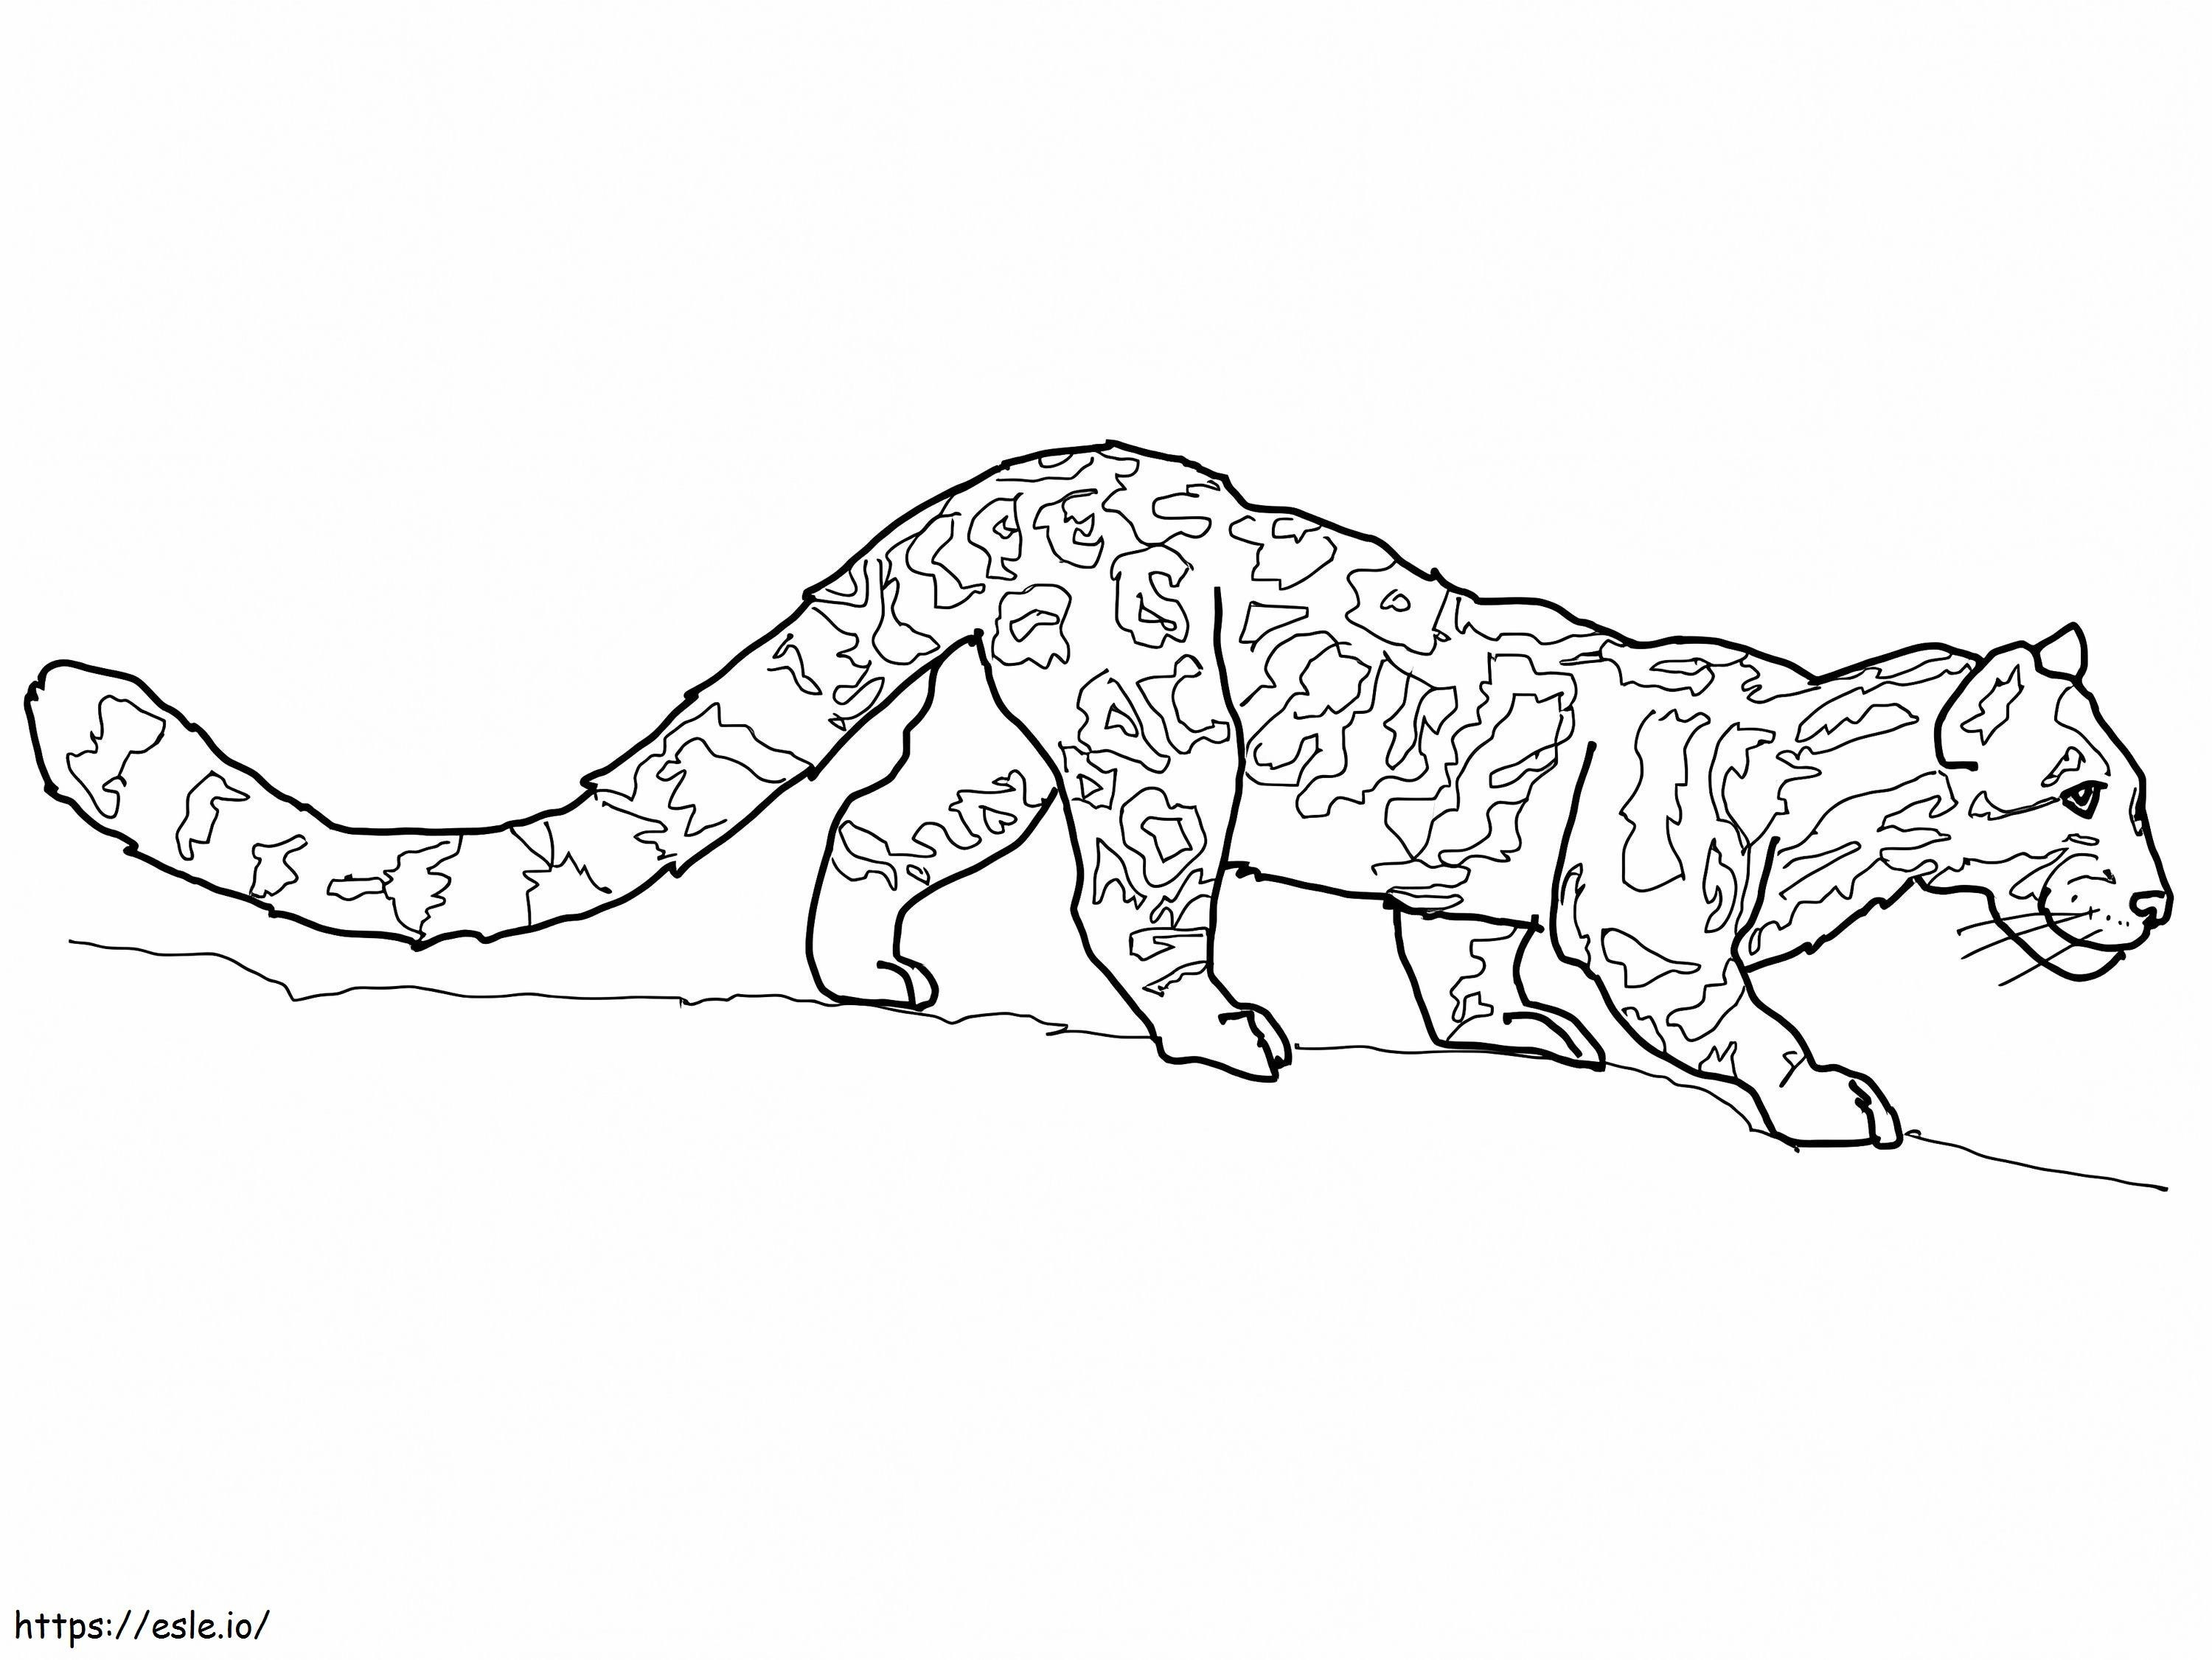 Clouded Leopard coloring page